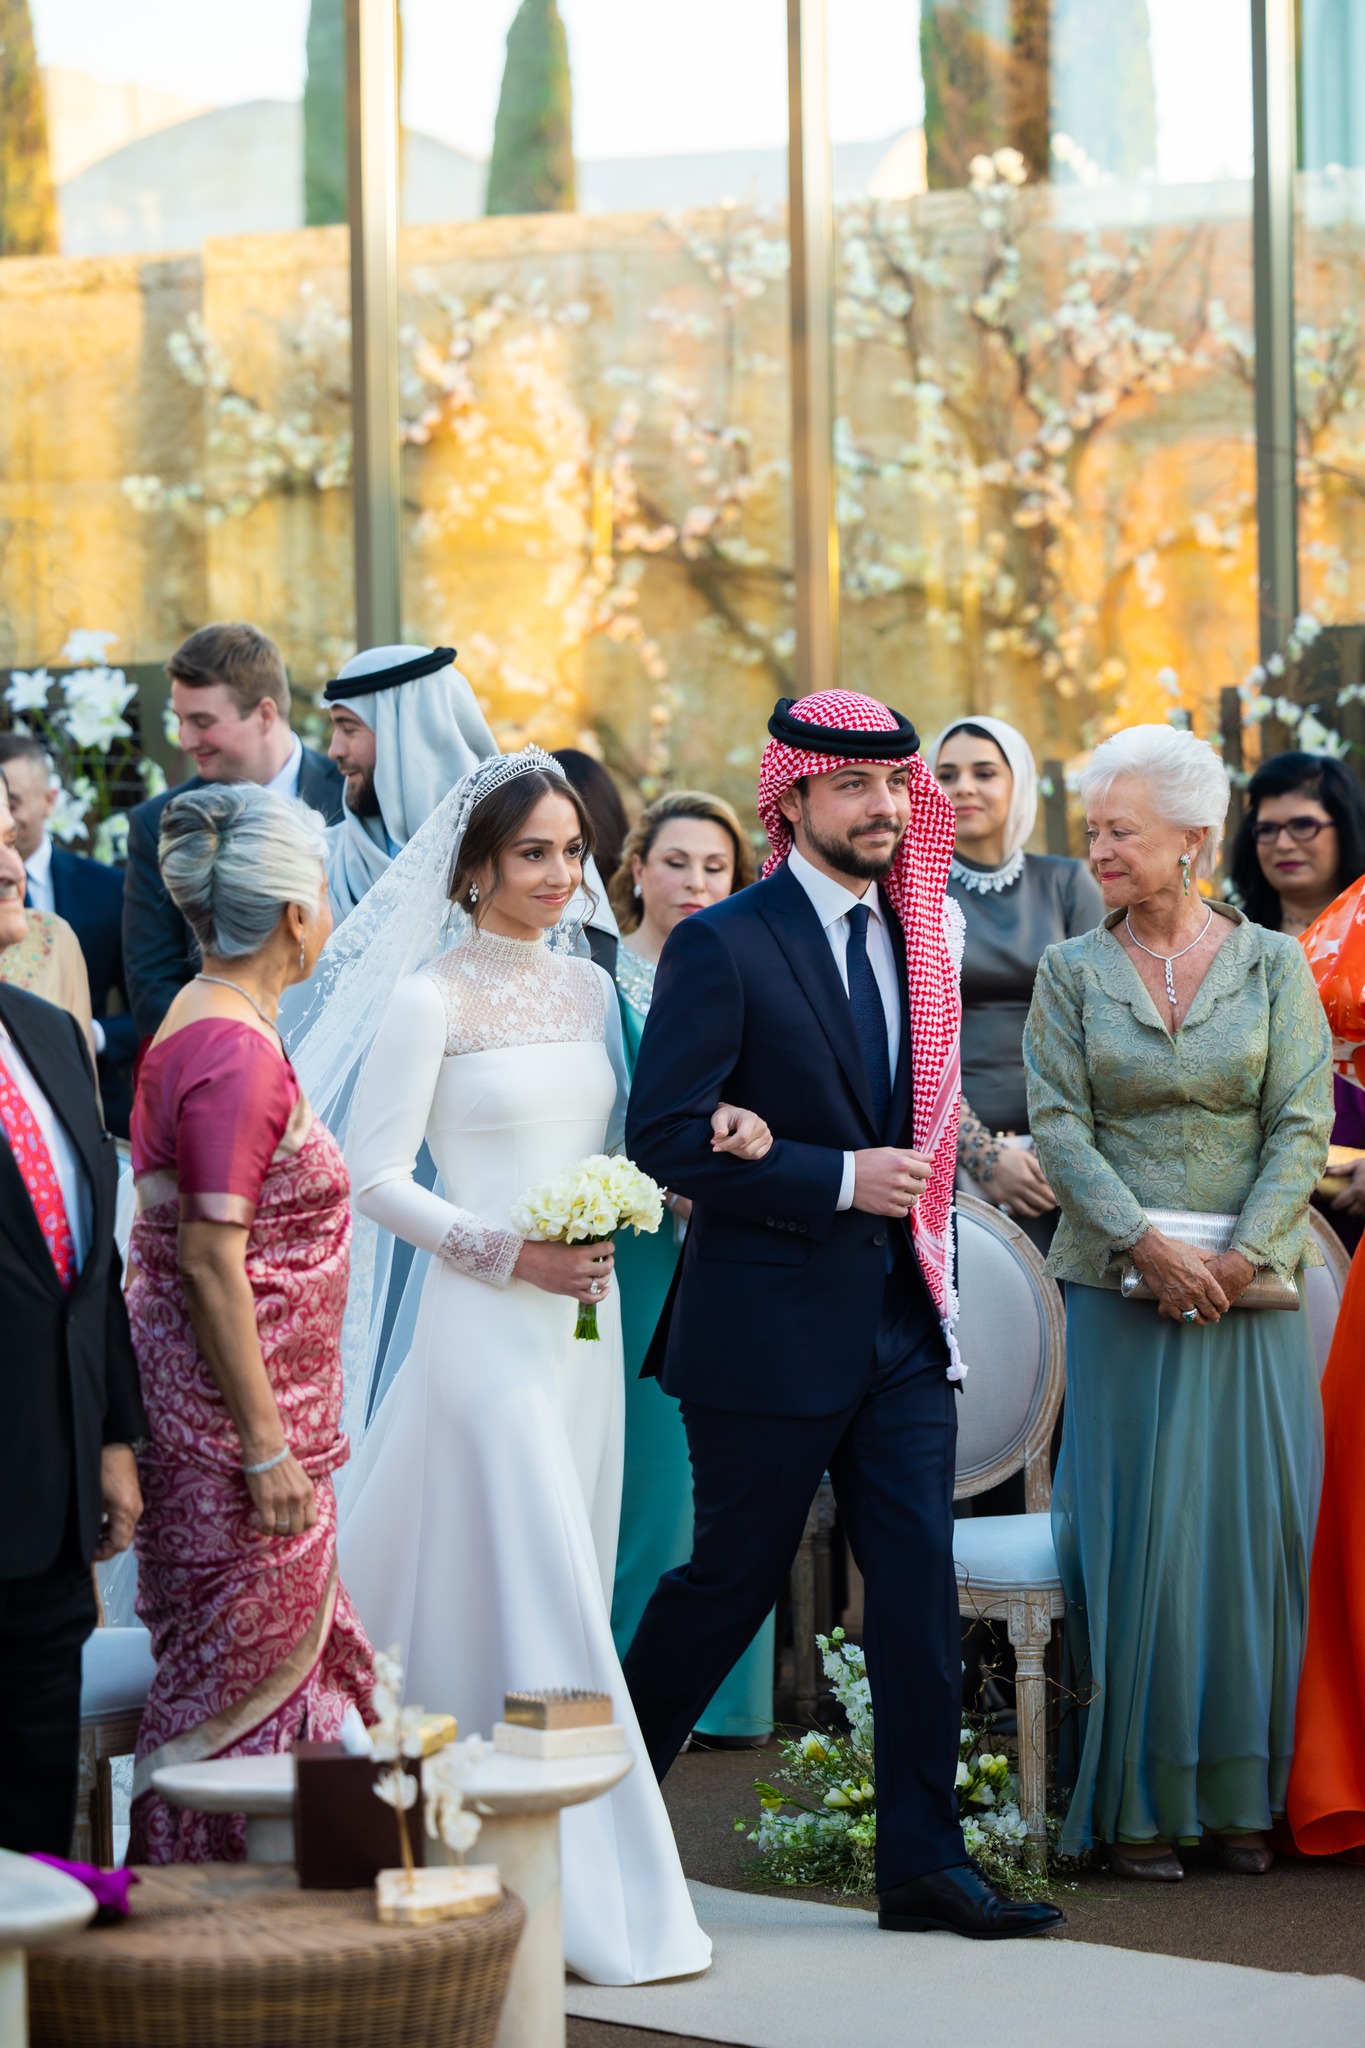 Princess Iman walked down the aisle with her elder brother Crown Prince Al-Hussein while her father and fiancé were waiting for her at the altar.